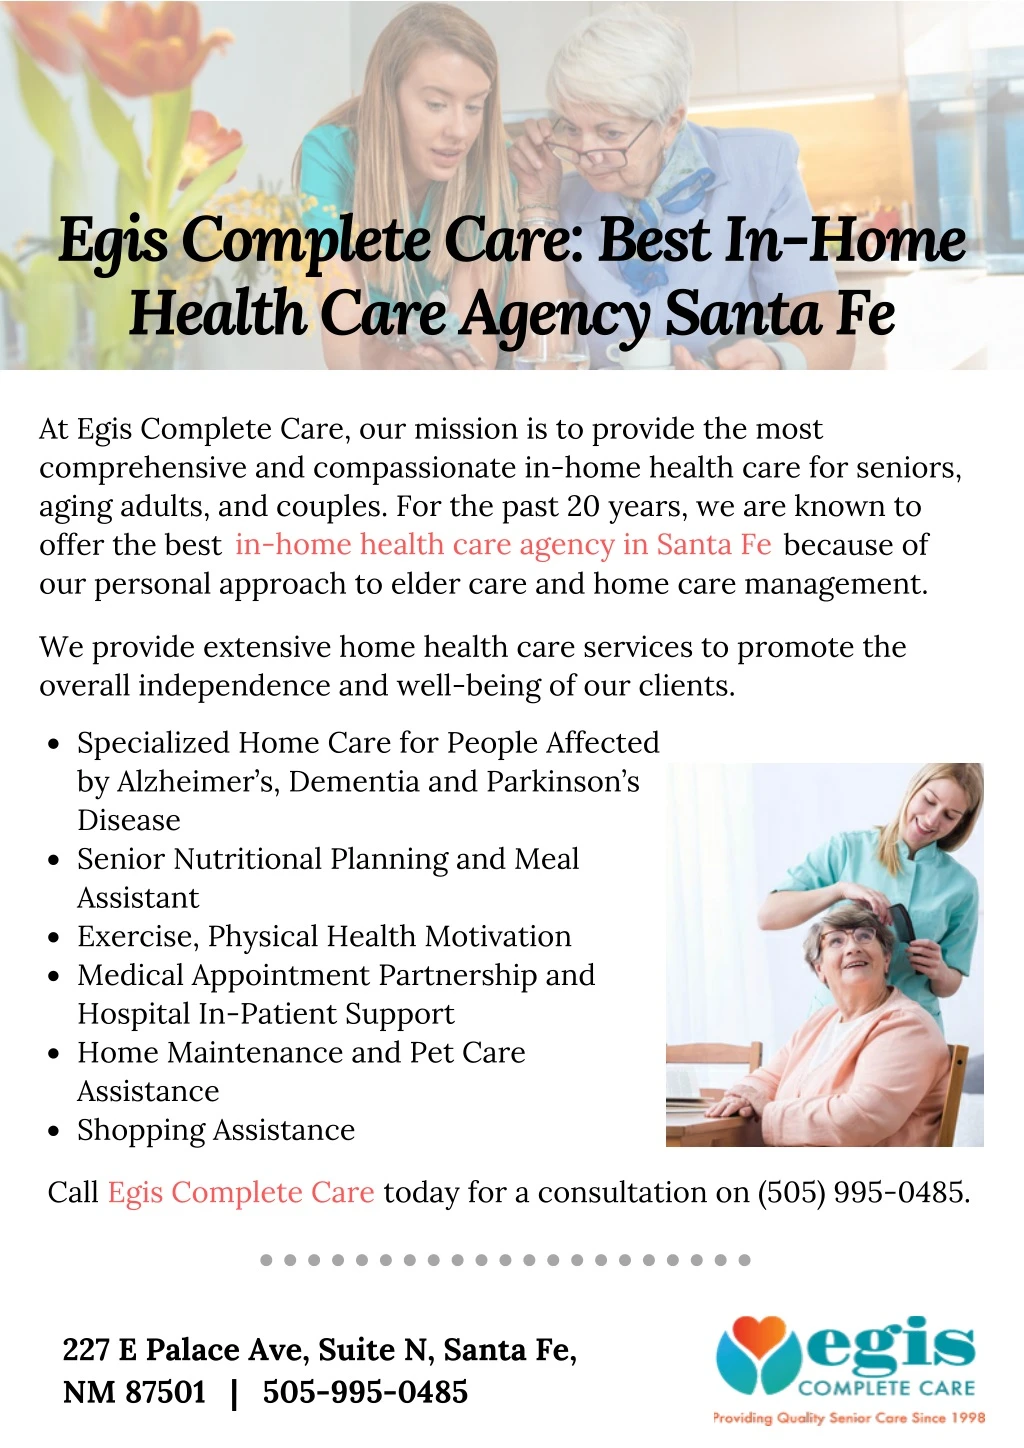 egis complete care best in home health care